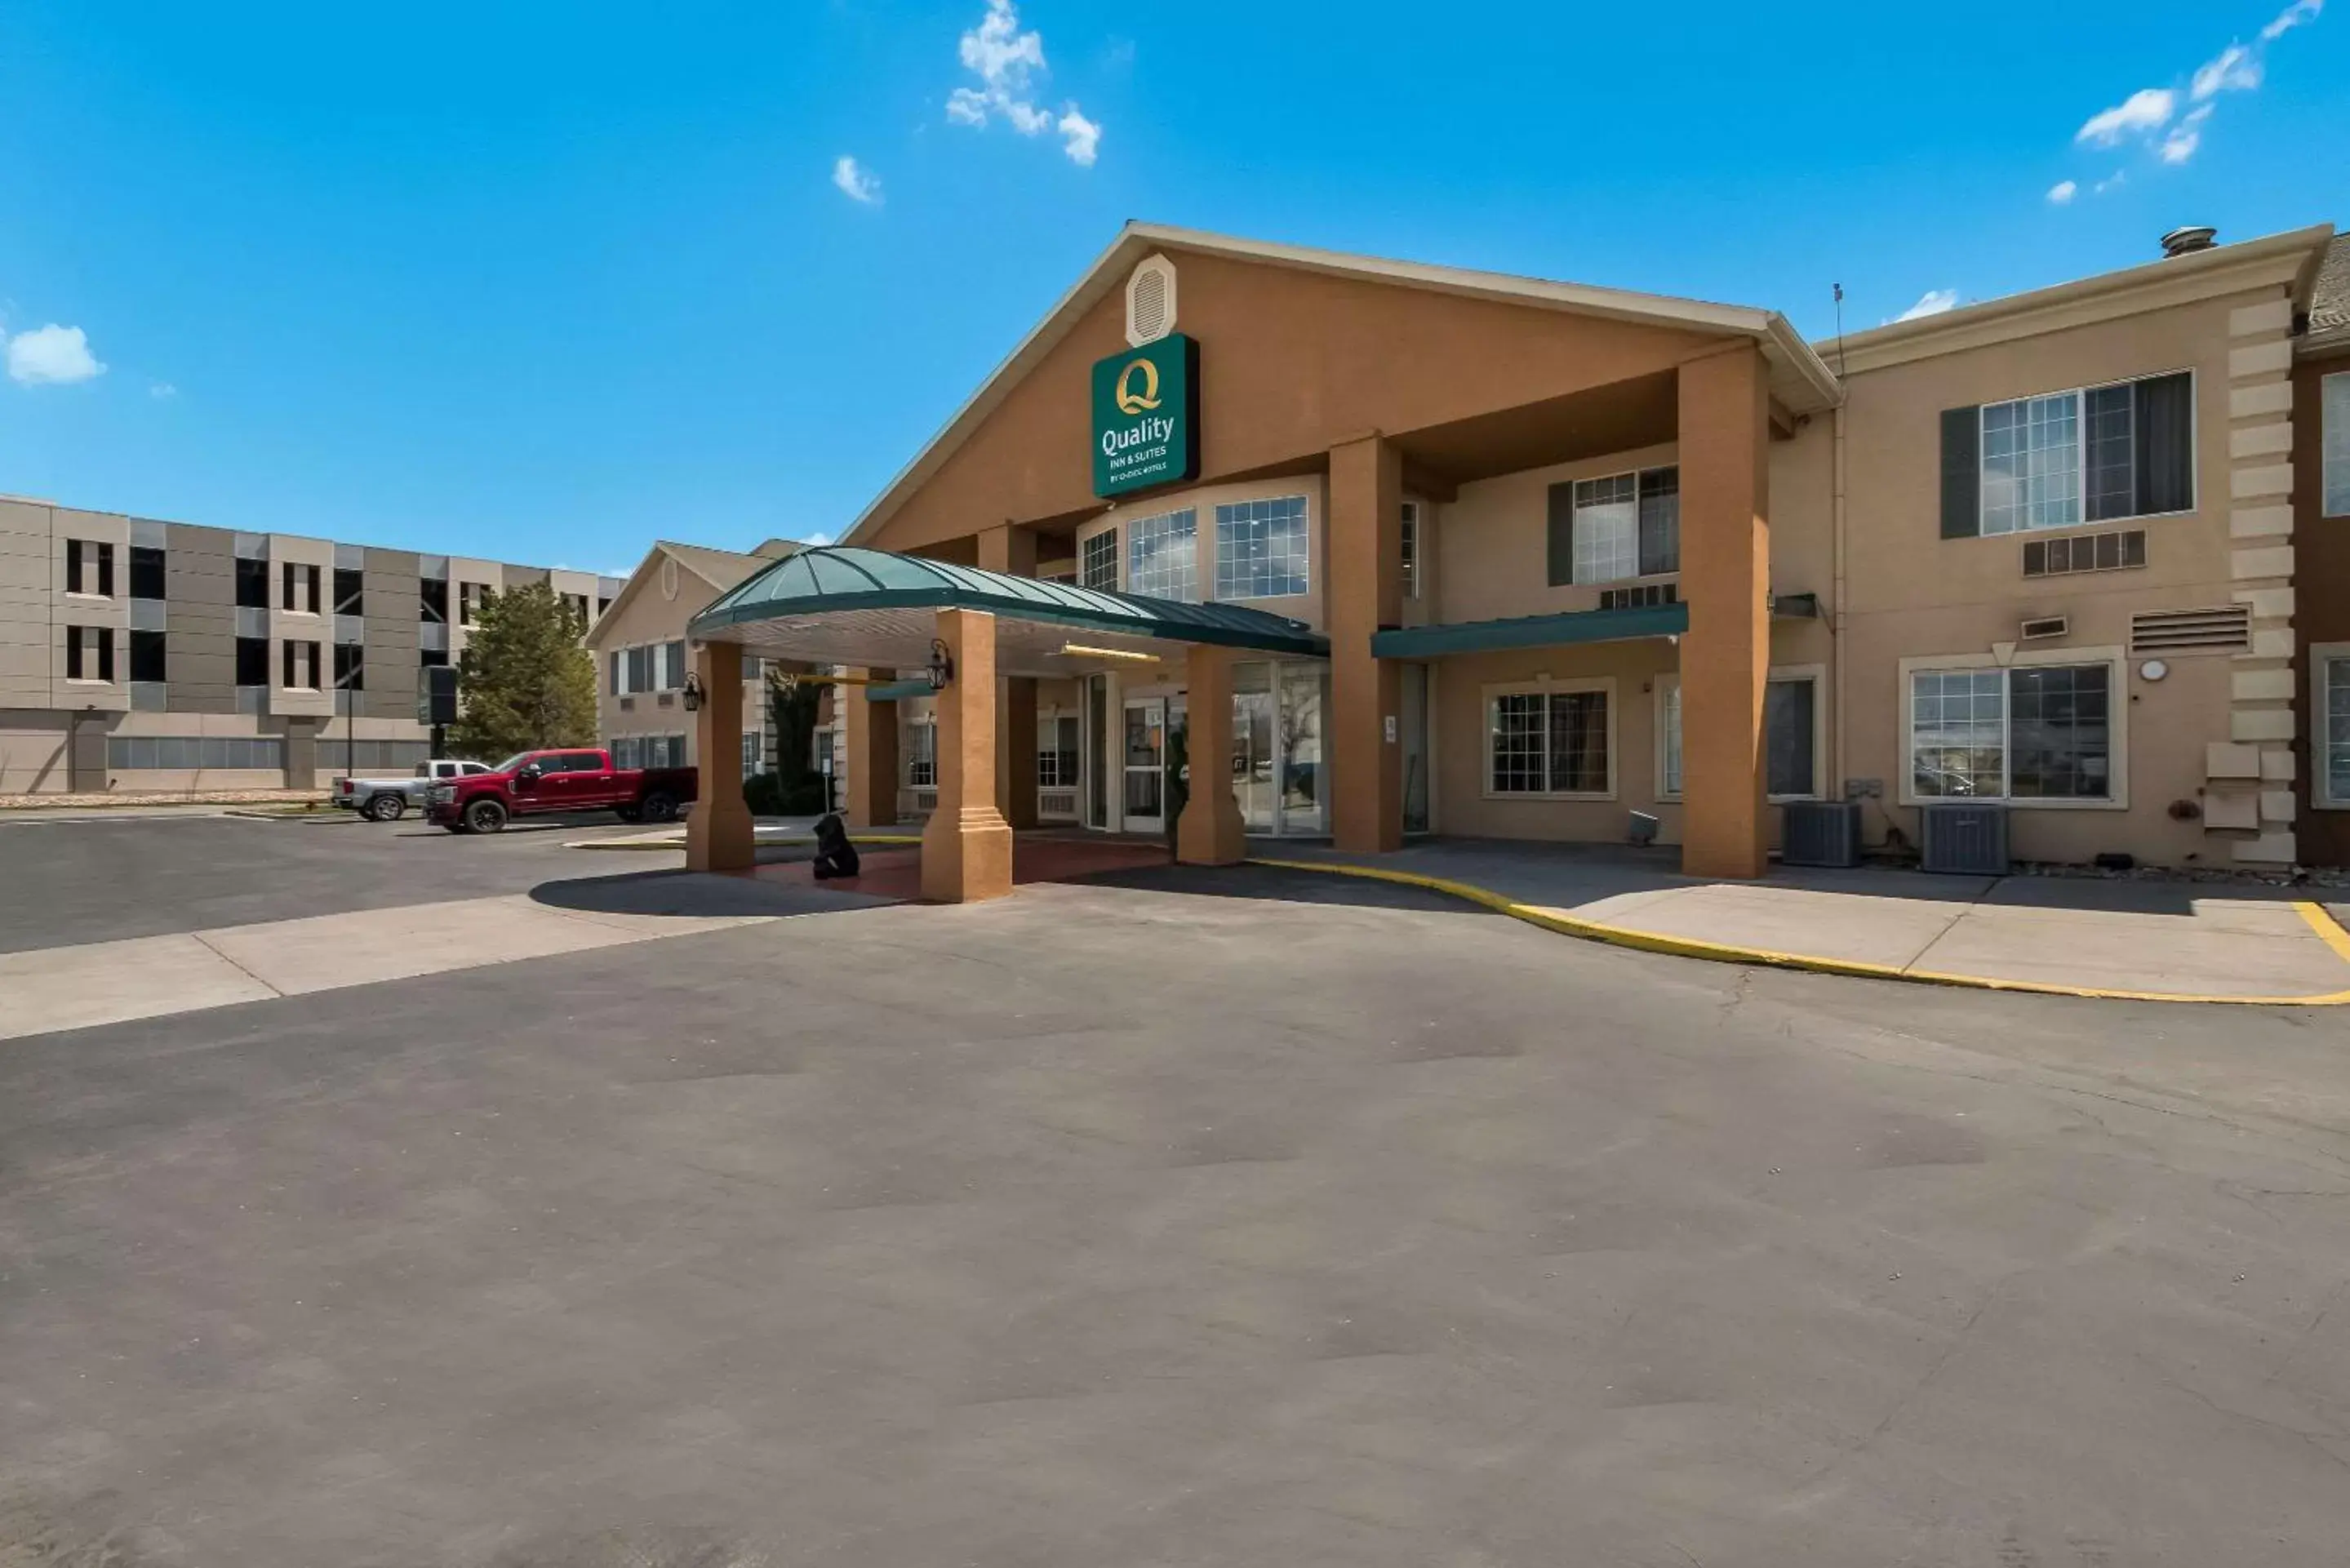 Property Building in Quality Inn & Suites Airport West Salt Lake City